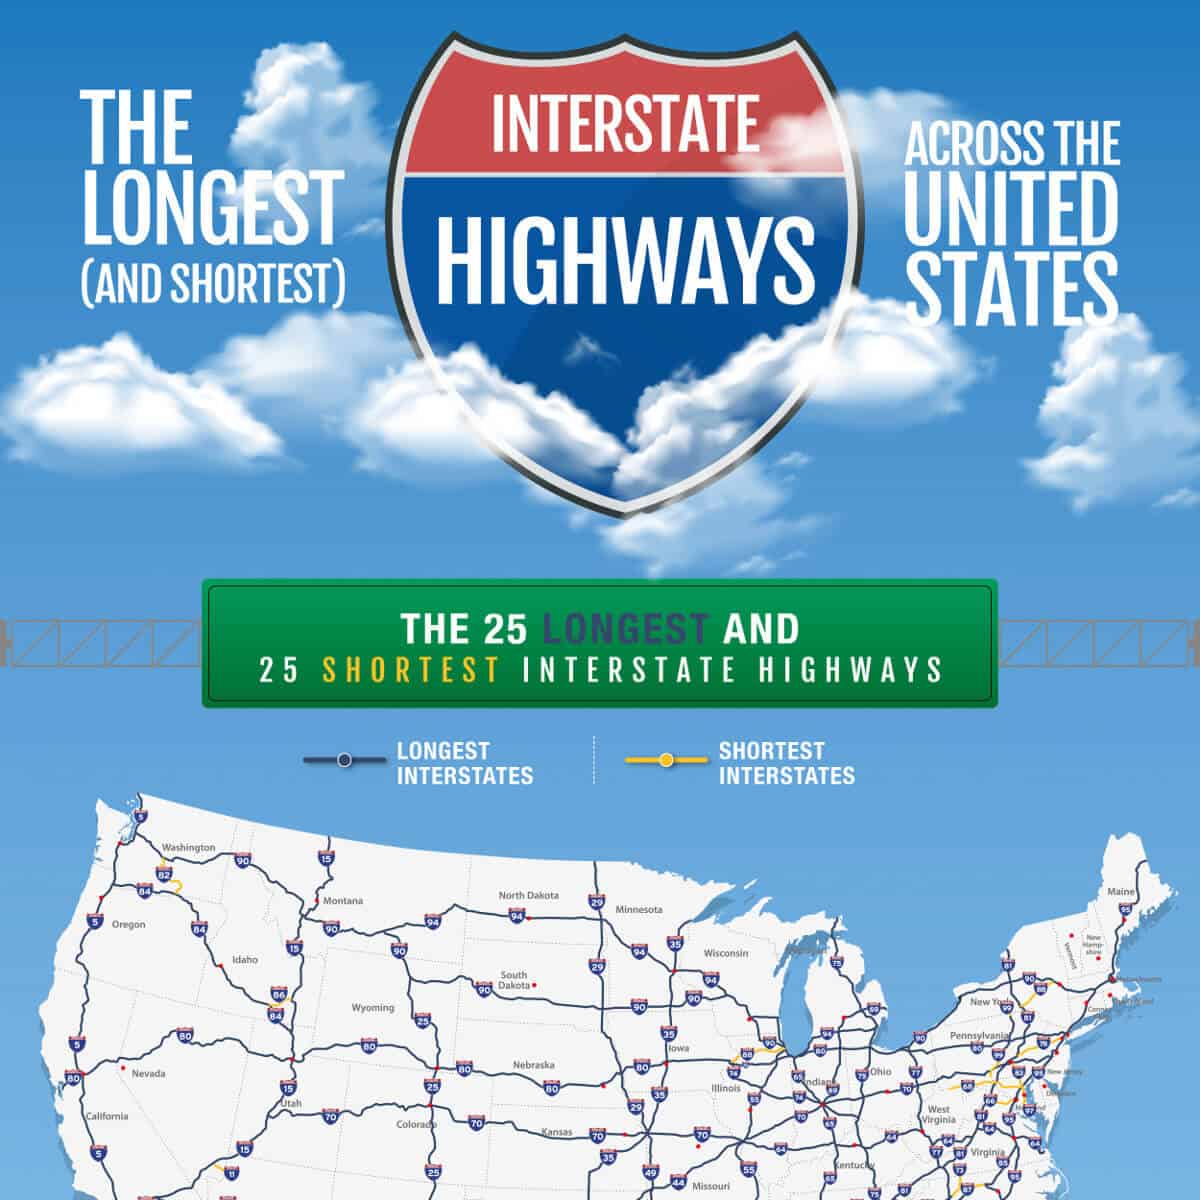 The Longest (and Shortest) Interstate Highways Across the United States